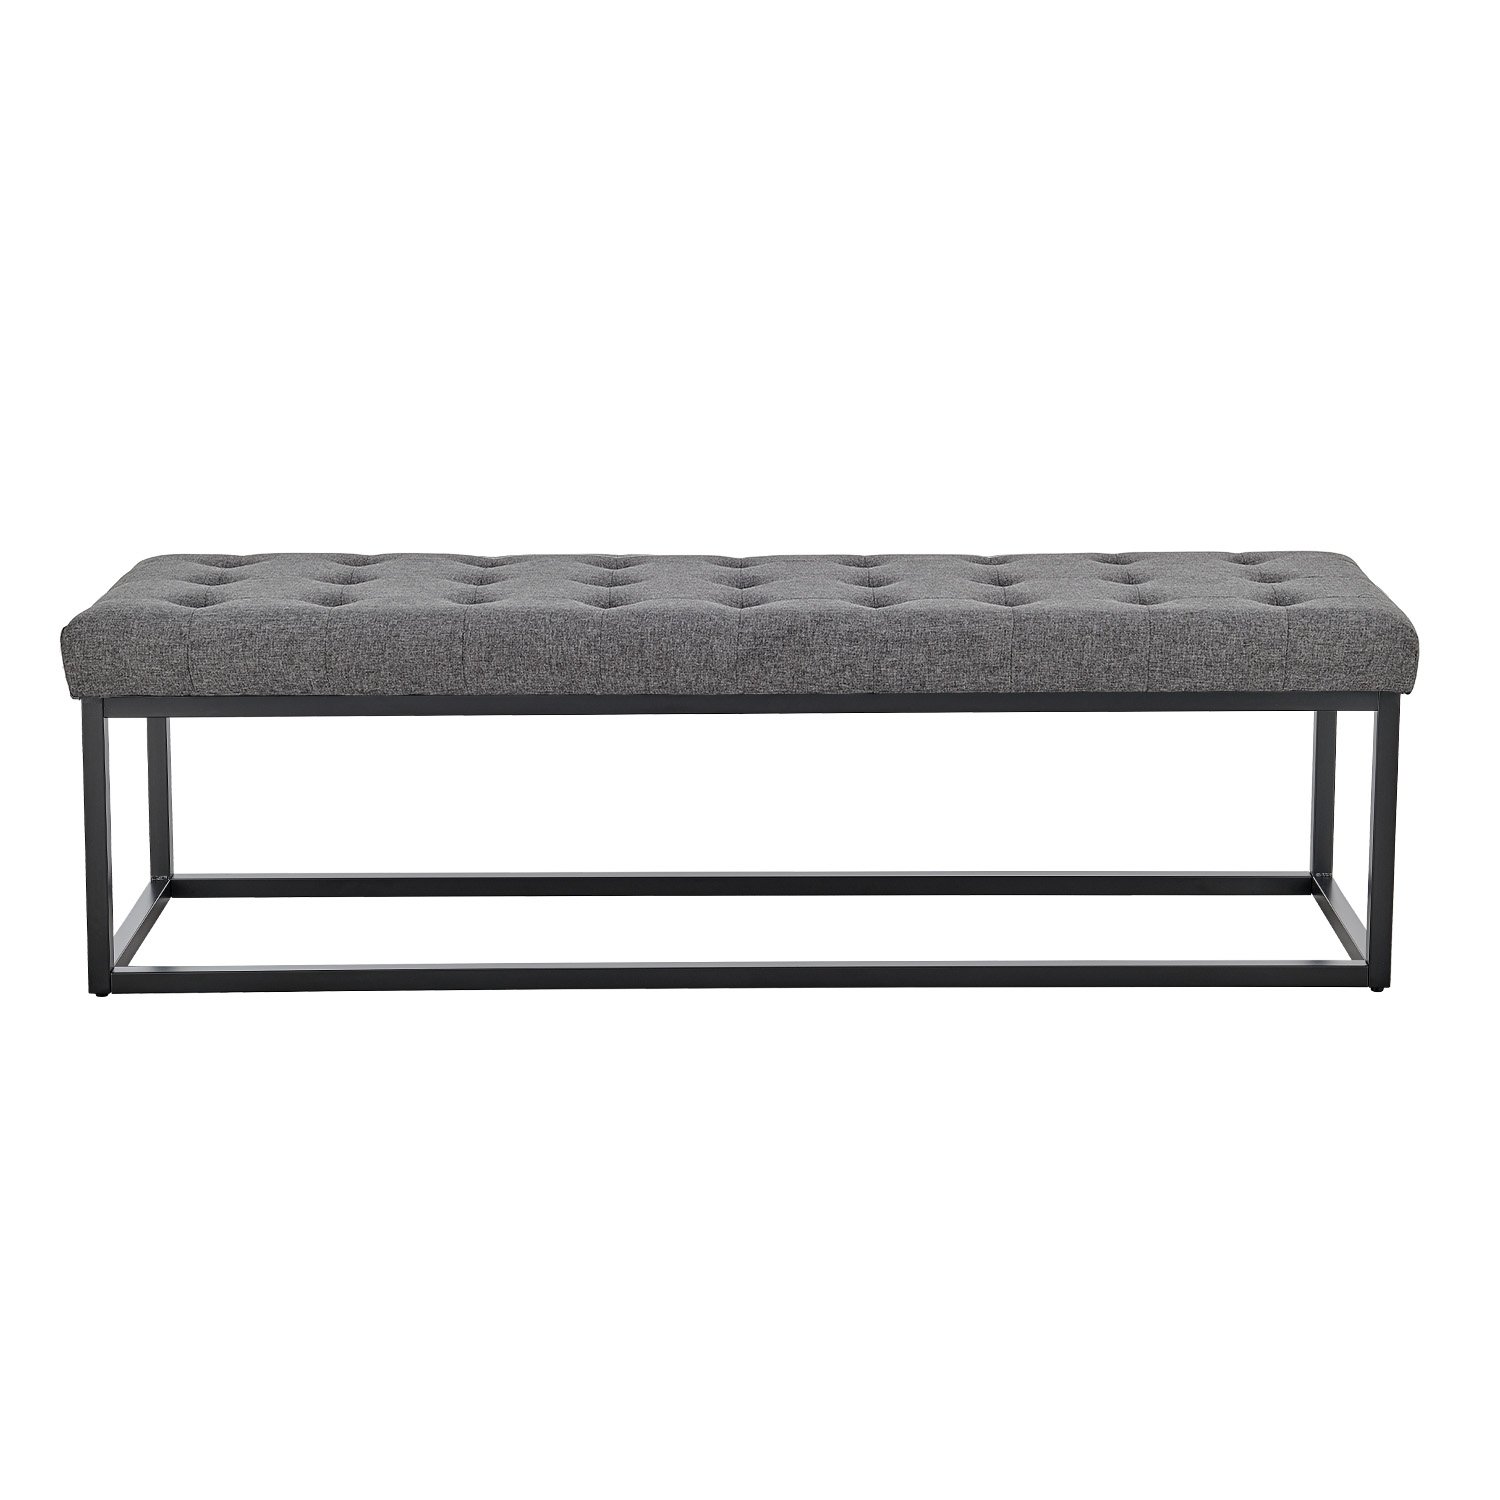 Cameron Button-Tufted Upholstered Bench with Metal Legs -Dark Grey 2